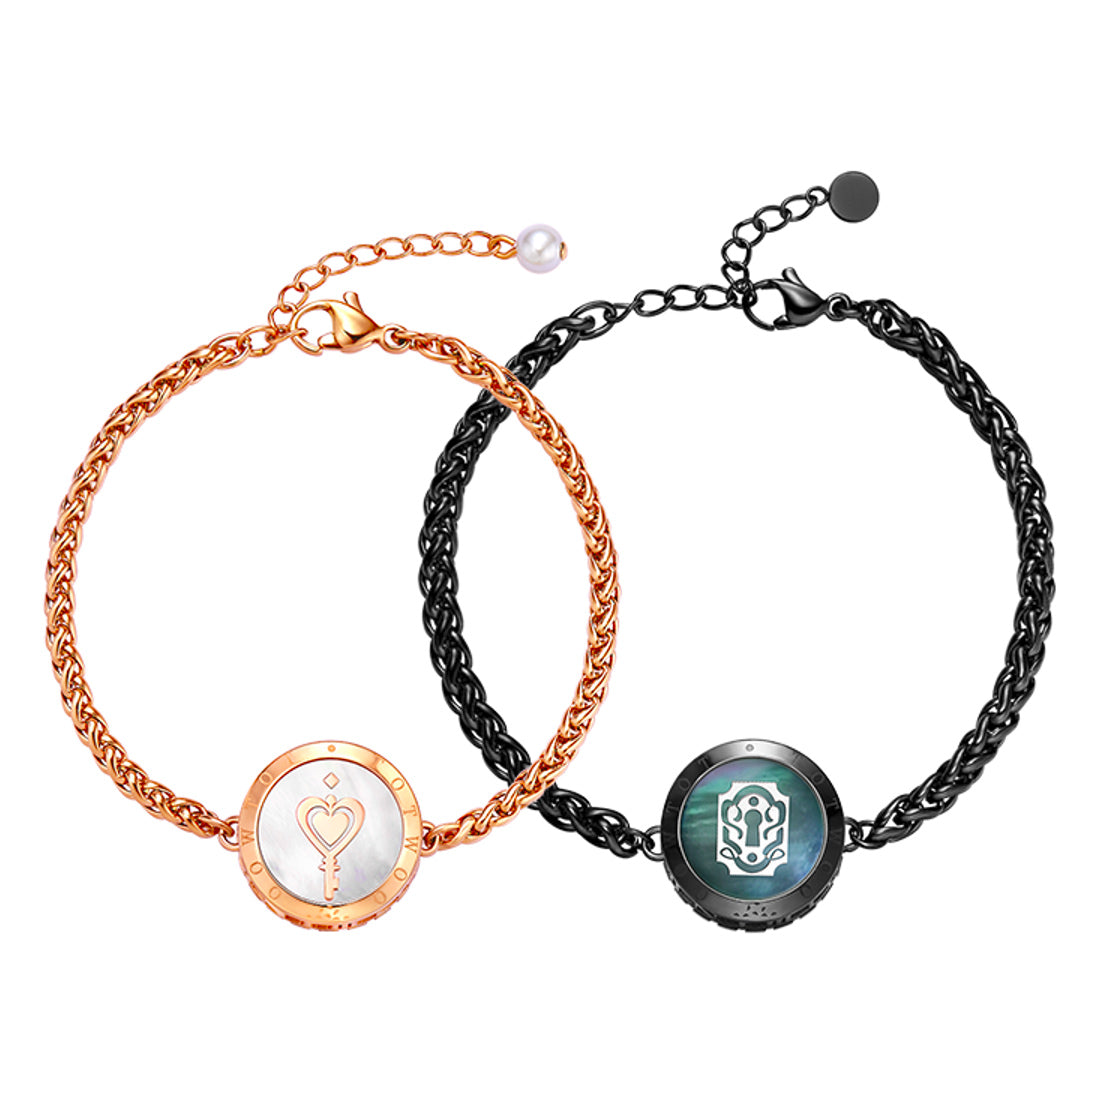 Lock and Key Bond Touch Bracelets Set for 2 Gullei.com